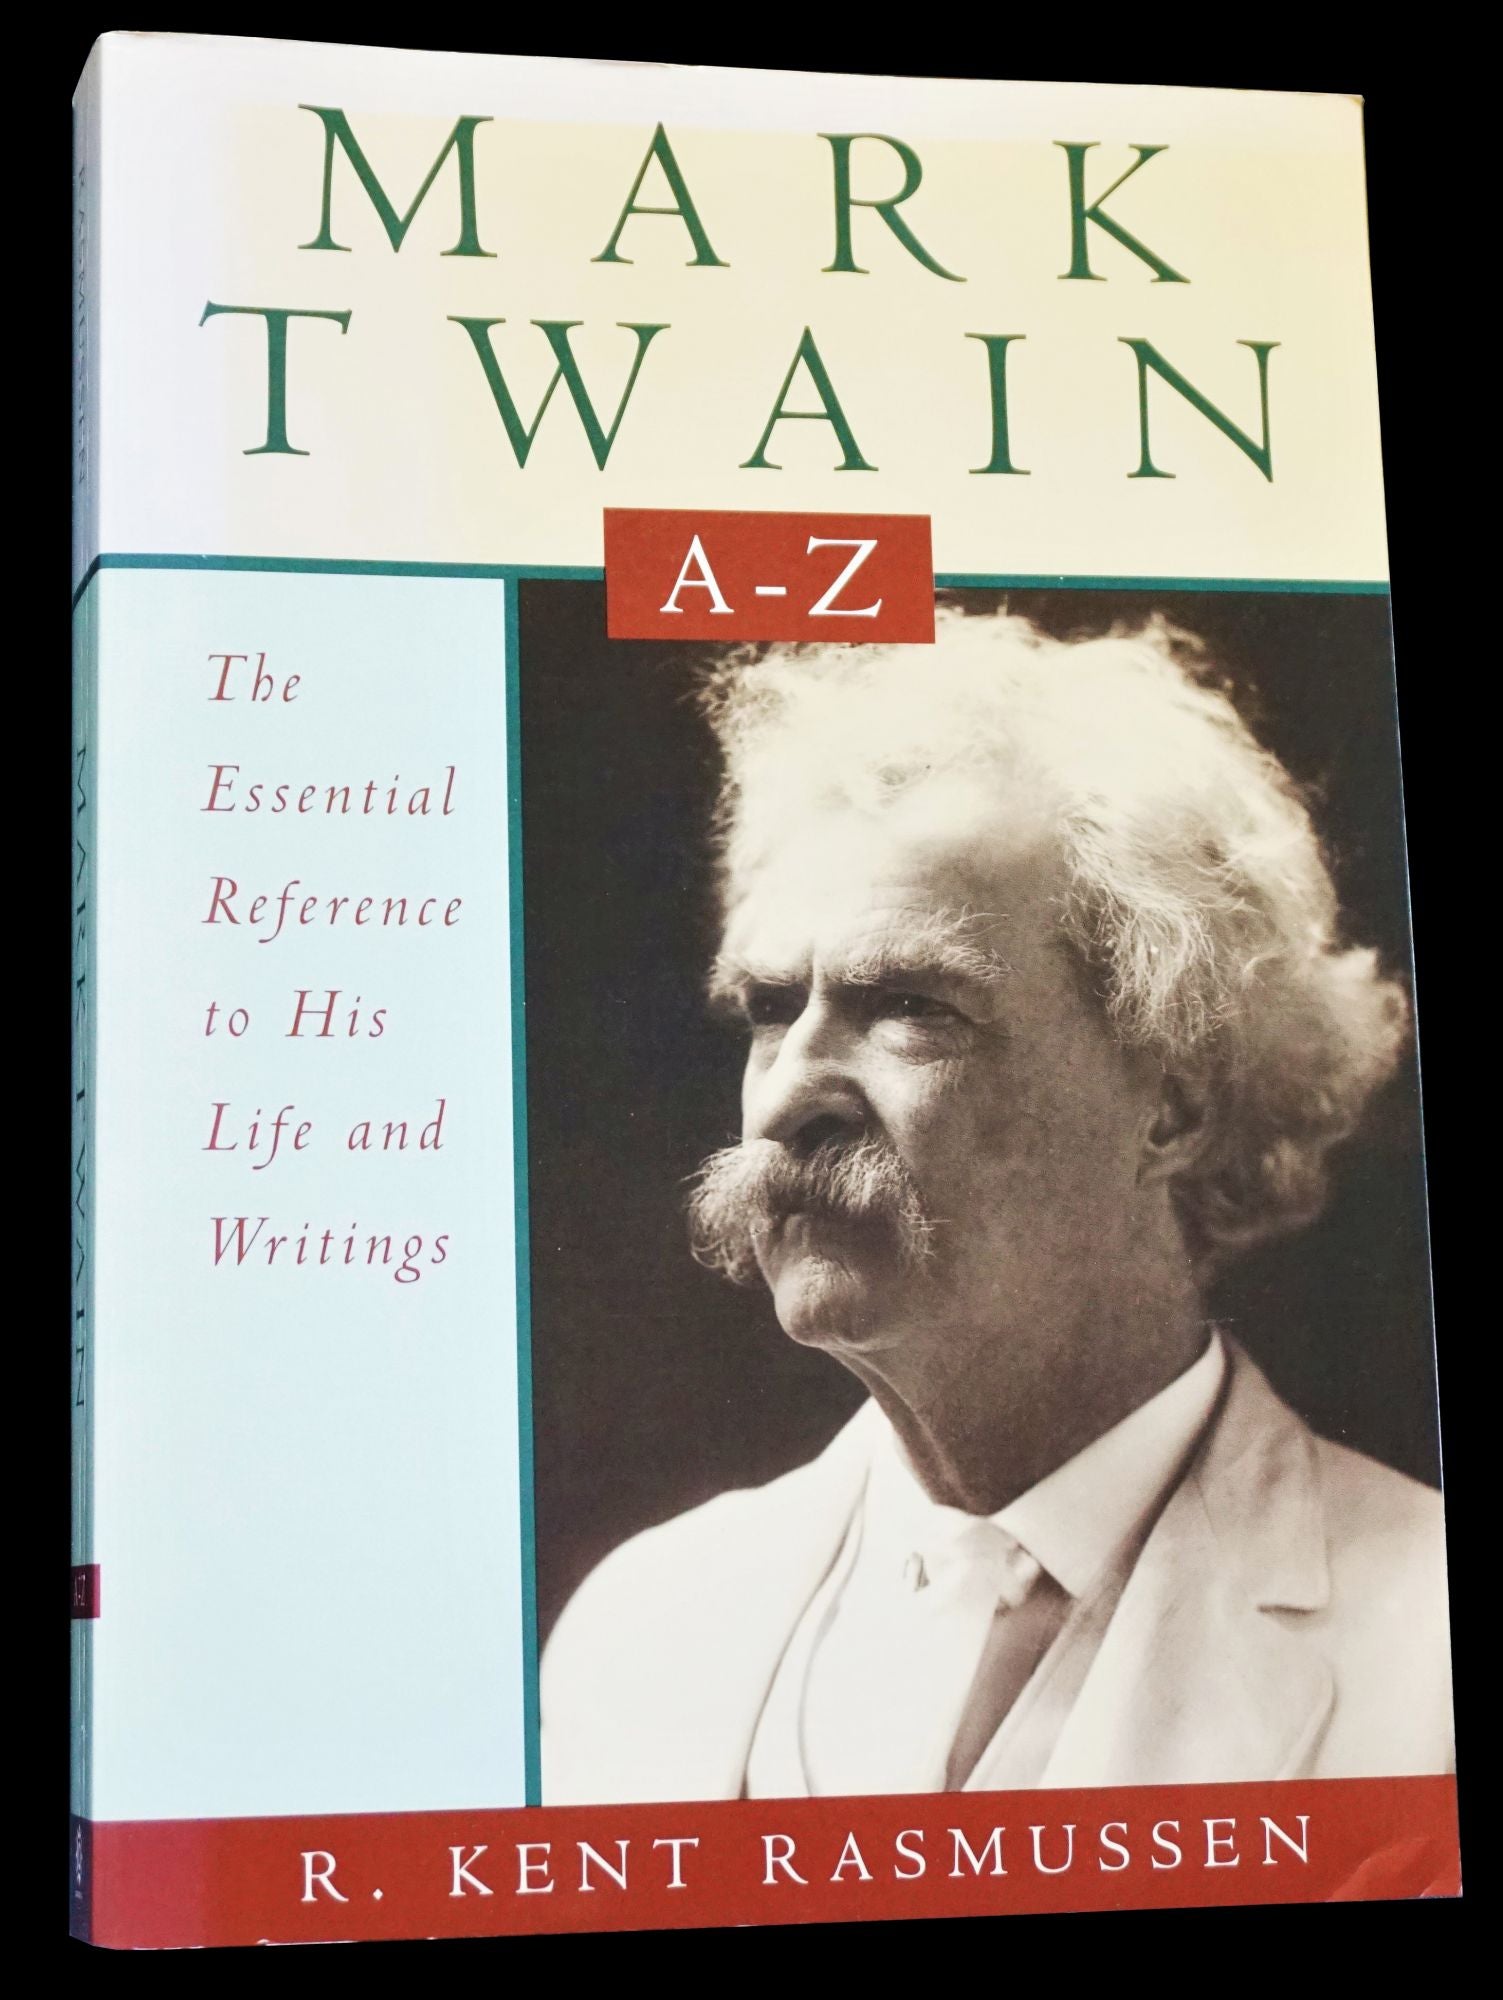 Collected Nonfiction of Mark Twain, Volume 1 by Mark Twain: 9781101907702